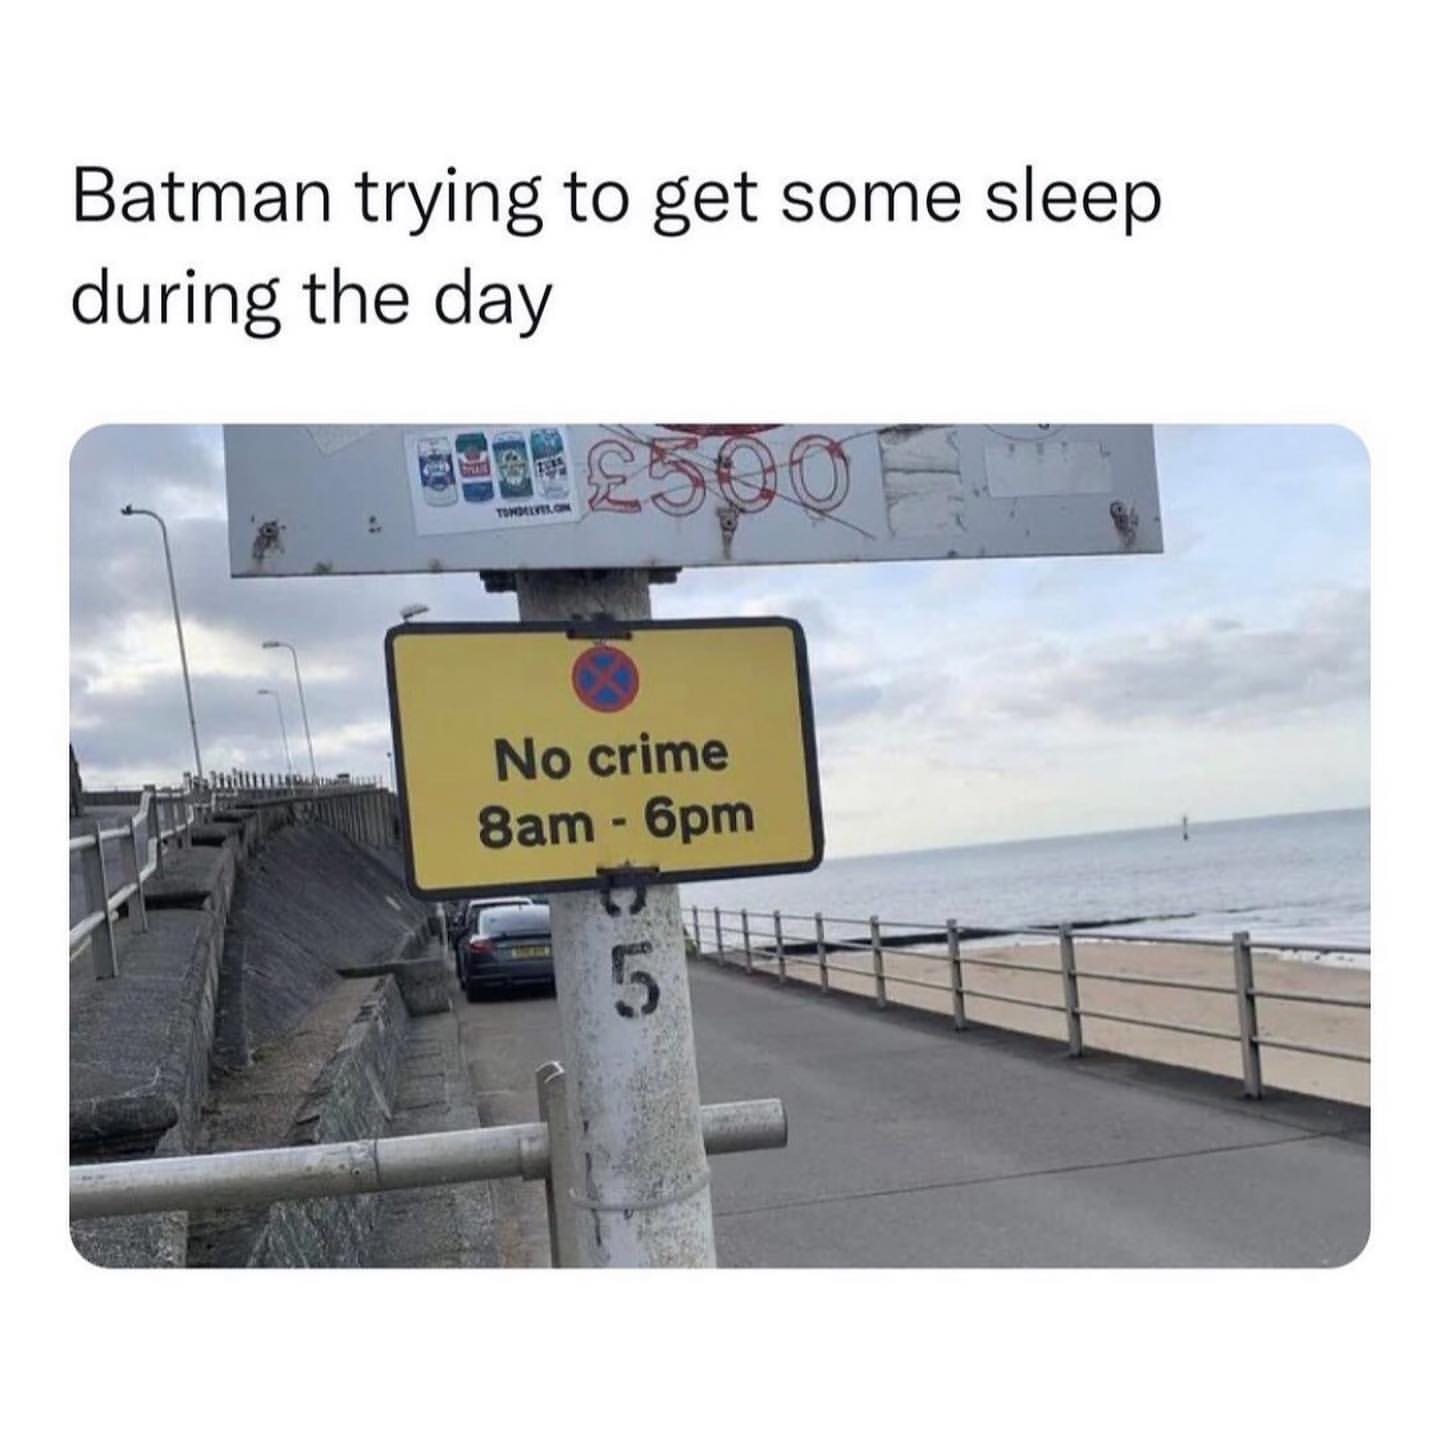 Batman trying to get some sleep during the day. No crime 8am - 6pm.